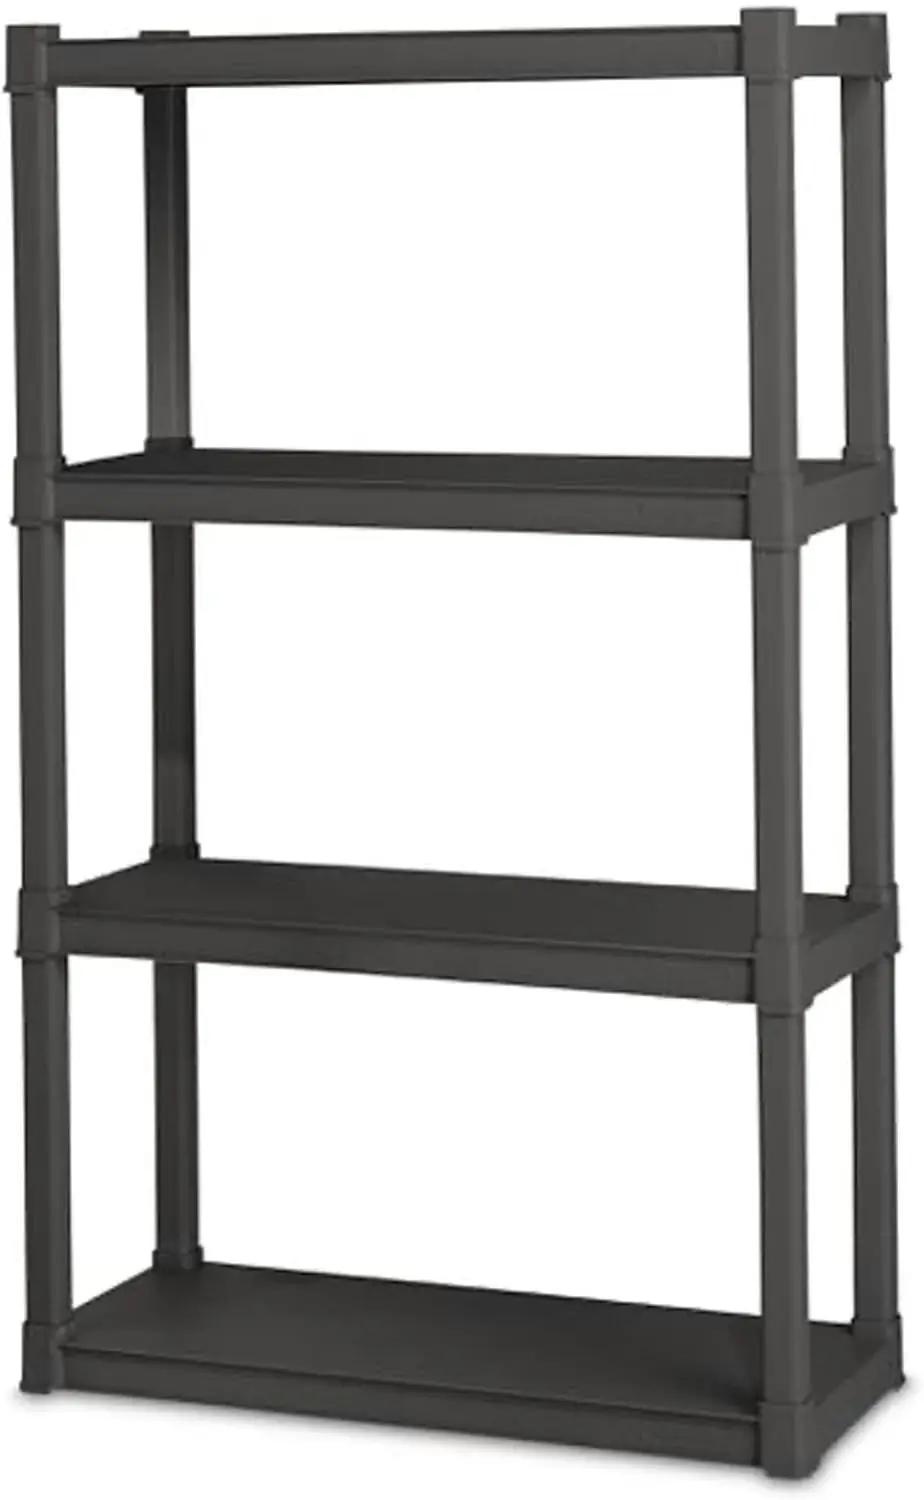 

4 Shelf Unit, Heavy Duty and Easy to Assemble Plastic Storage Unit, Organize Bins in the Garage, Basement, Attic, 1/2/4/6-Pack